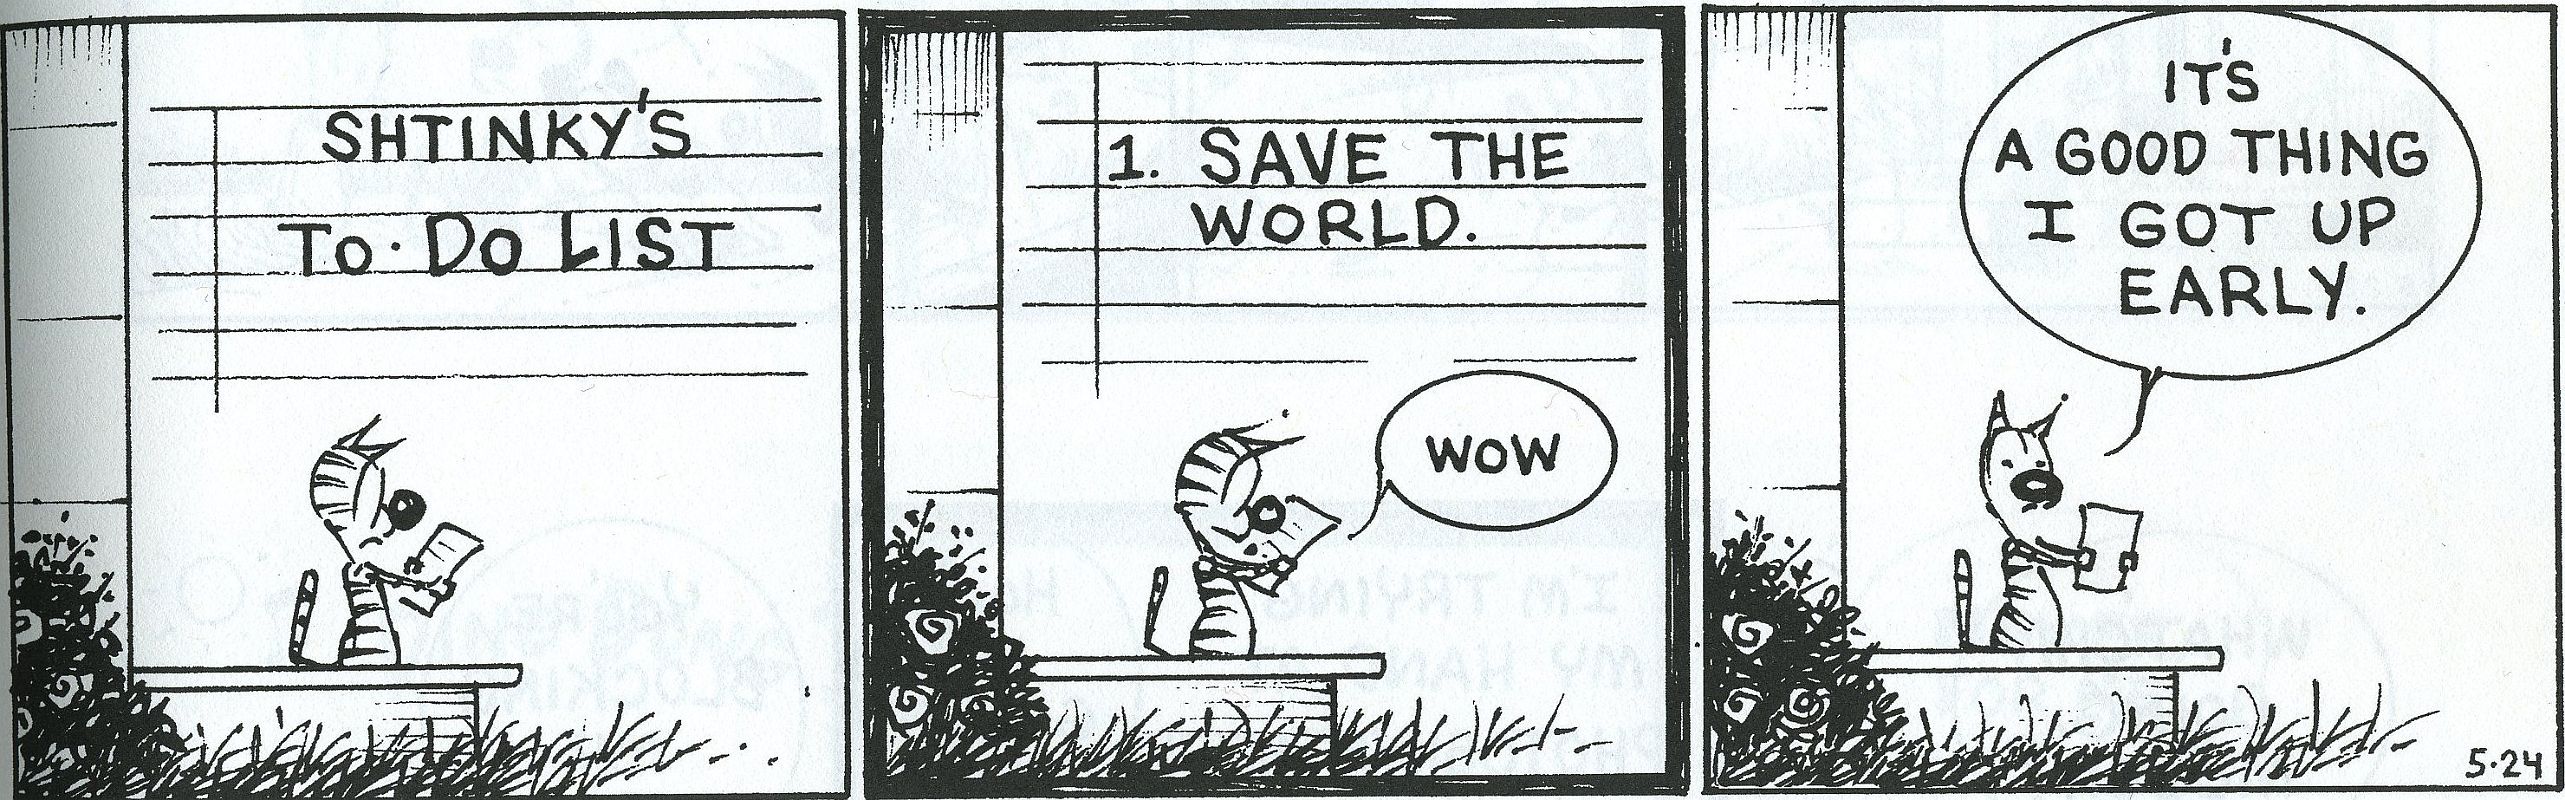 12 Mutts - Save The World 